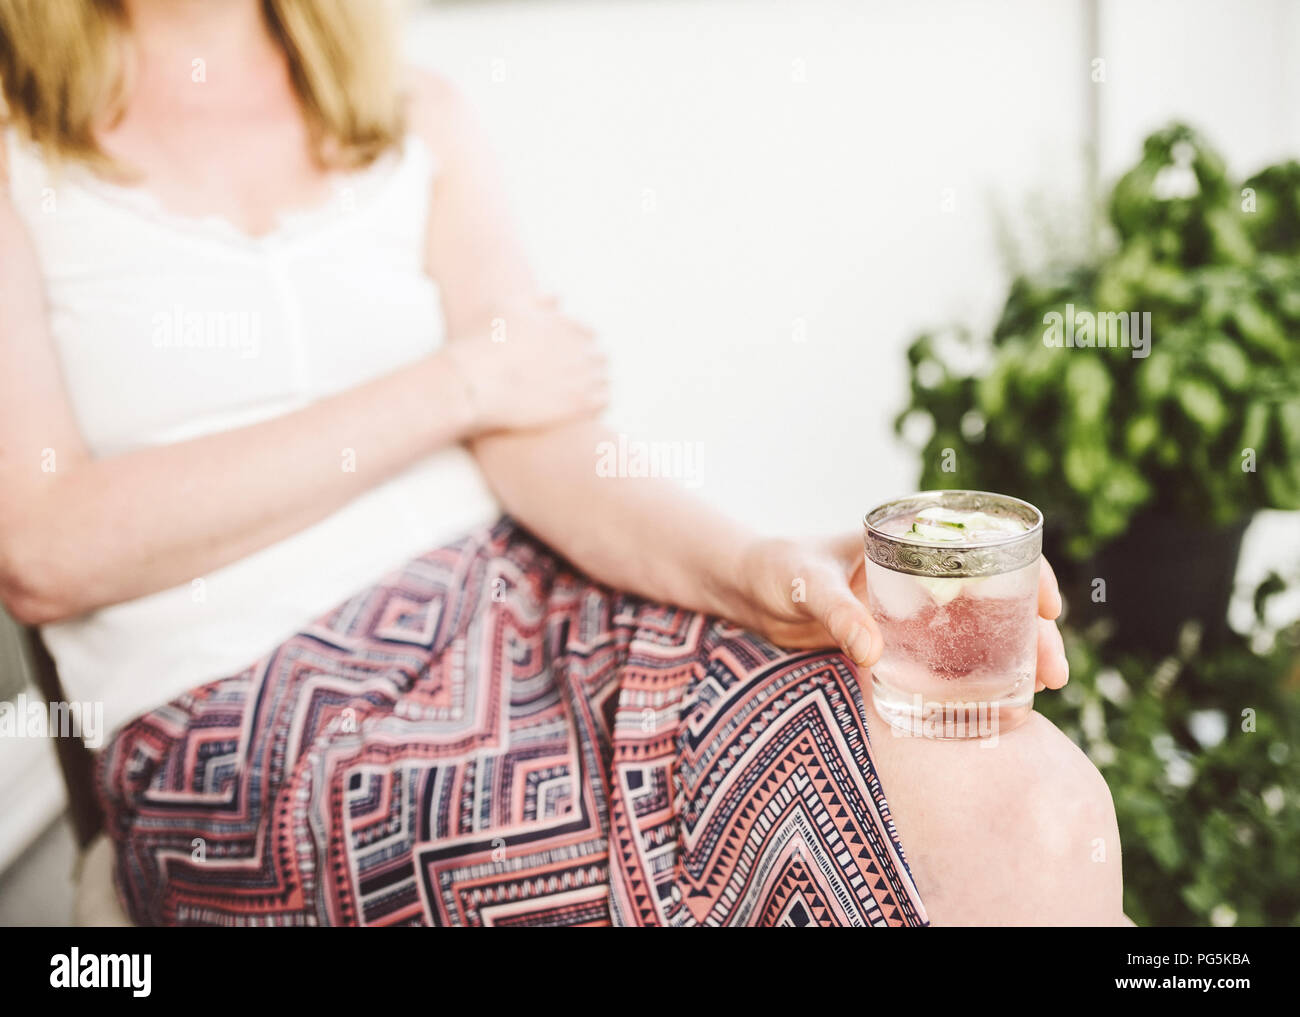 Blonde woman relaxing on patio holding boisson glacée Banque D'Images